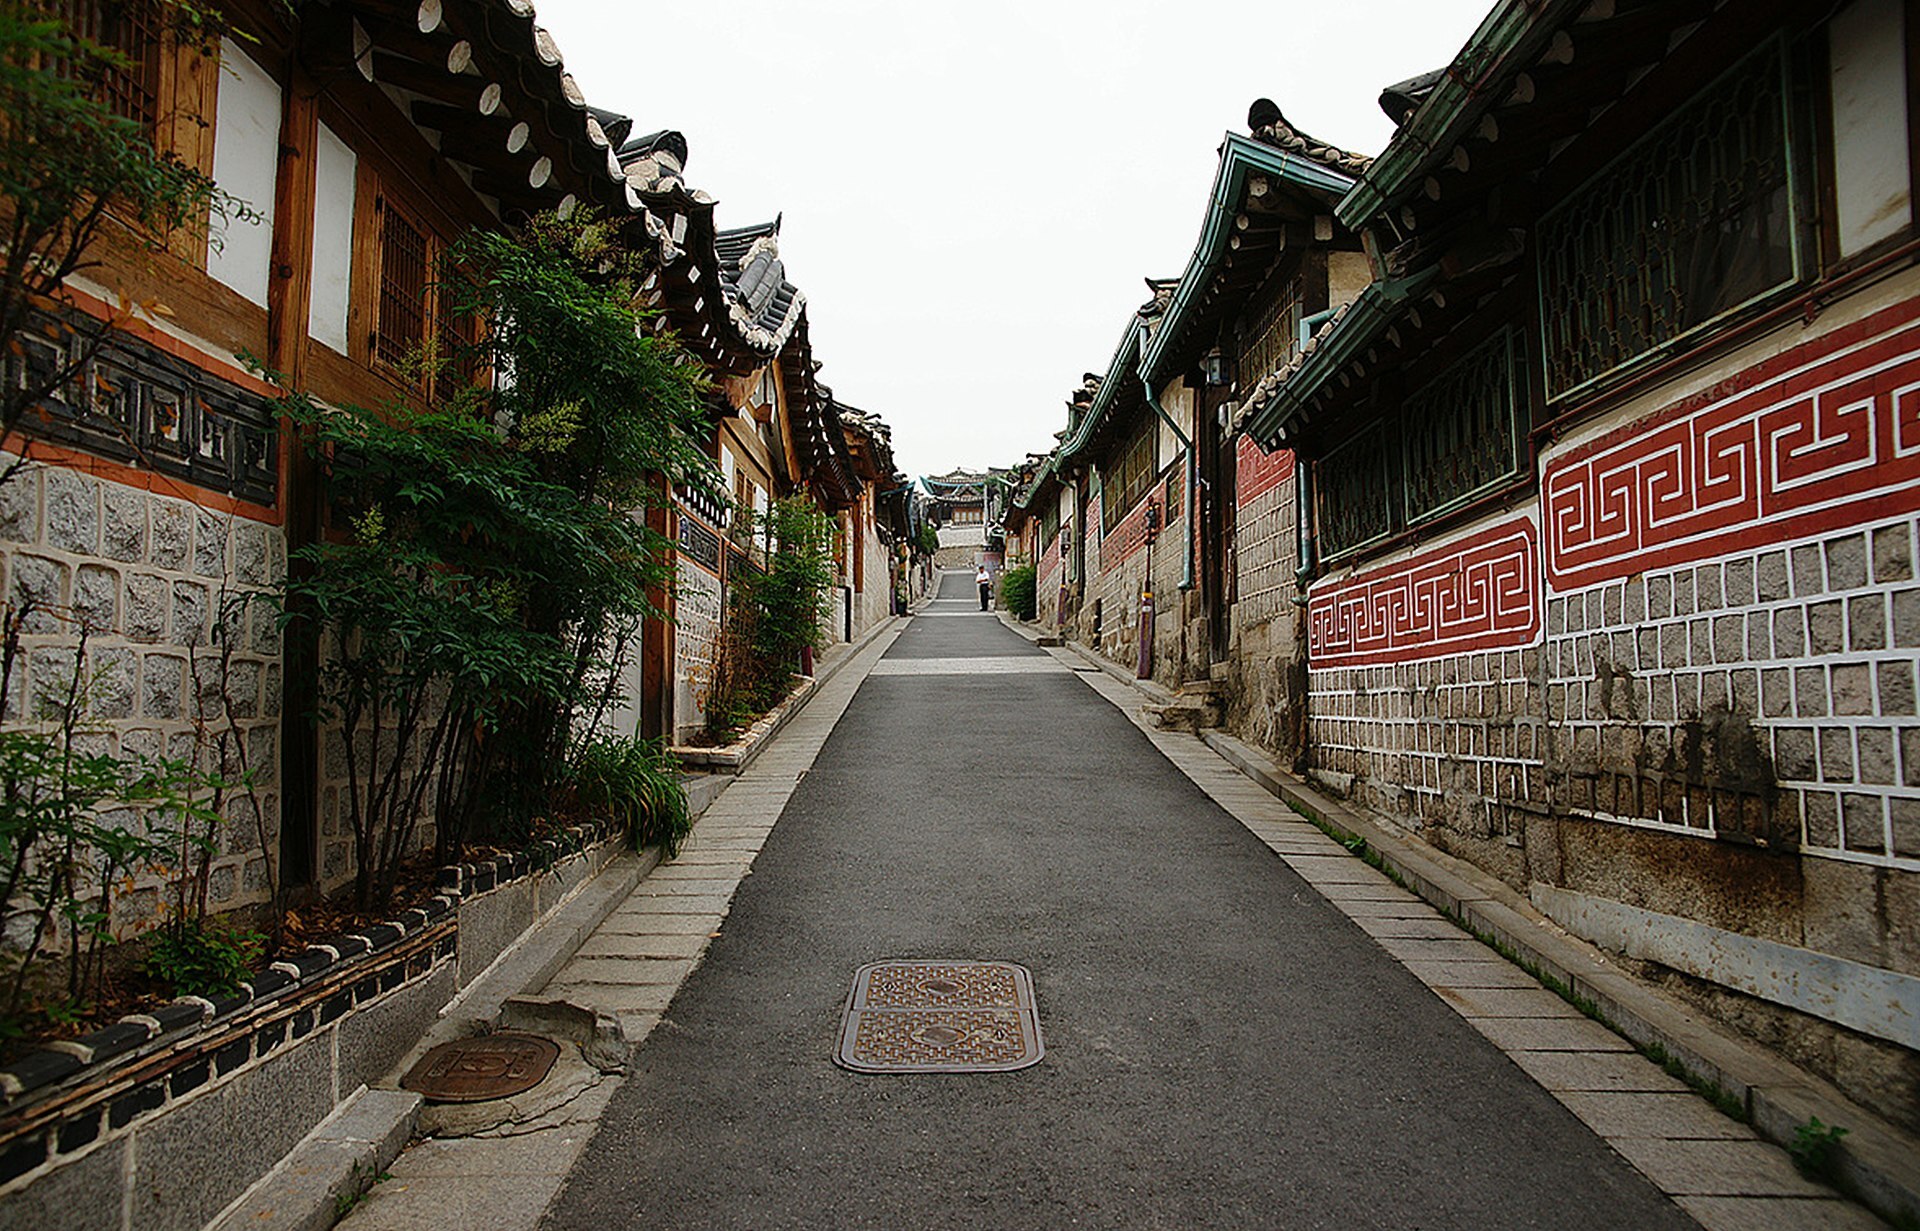 The Eight Scenic Views of Bukchon in South Korea